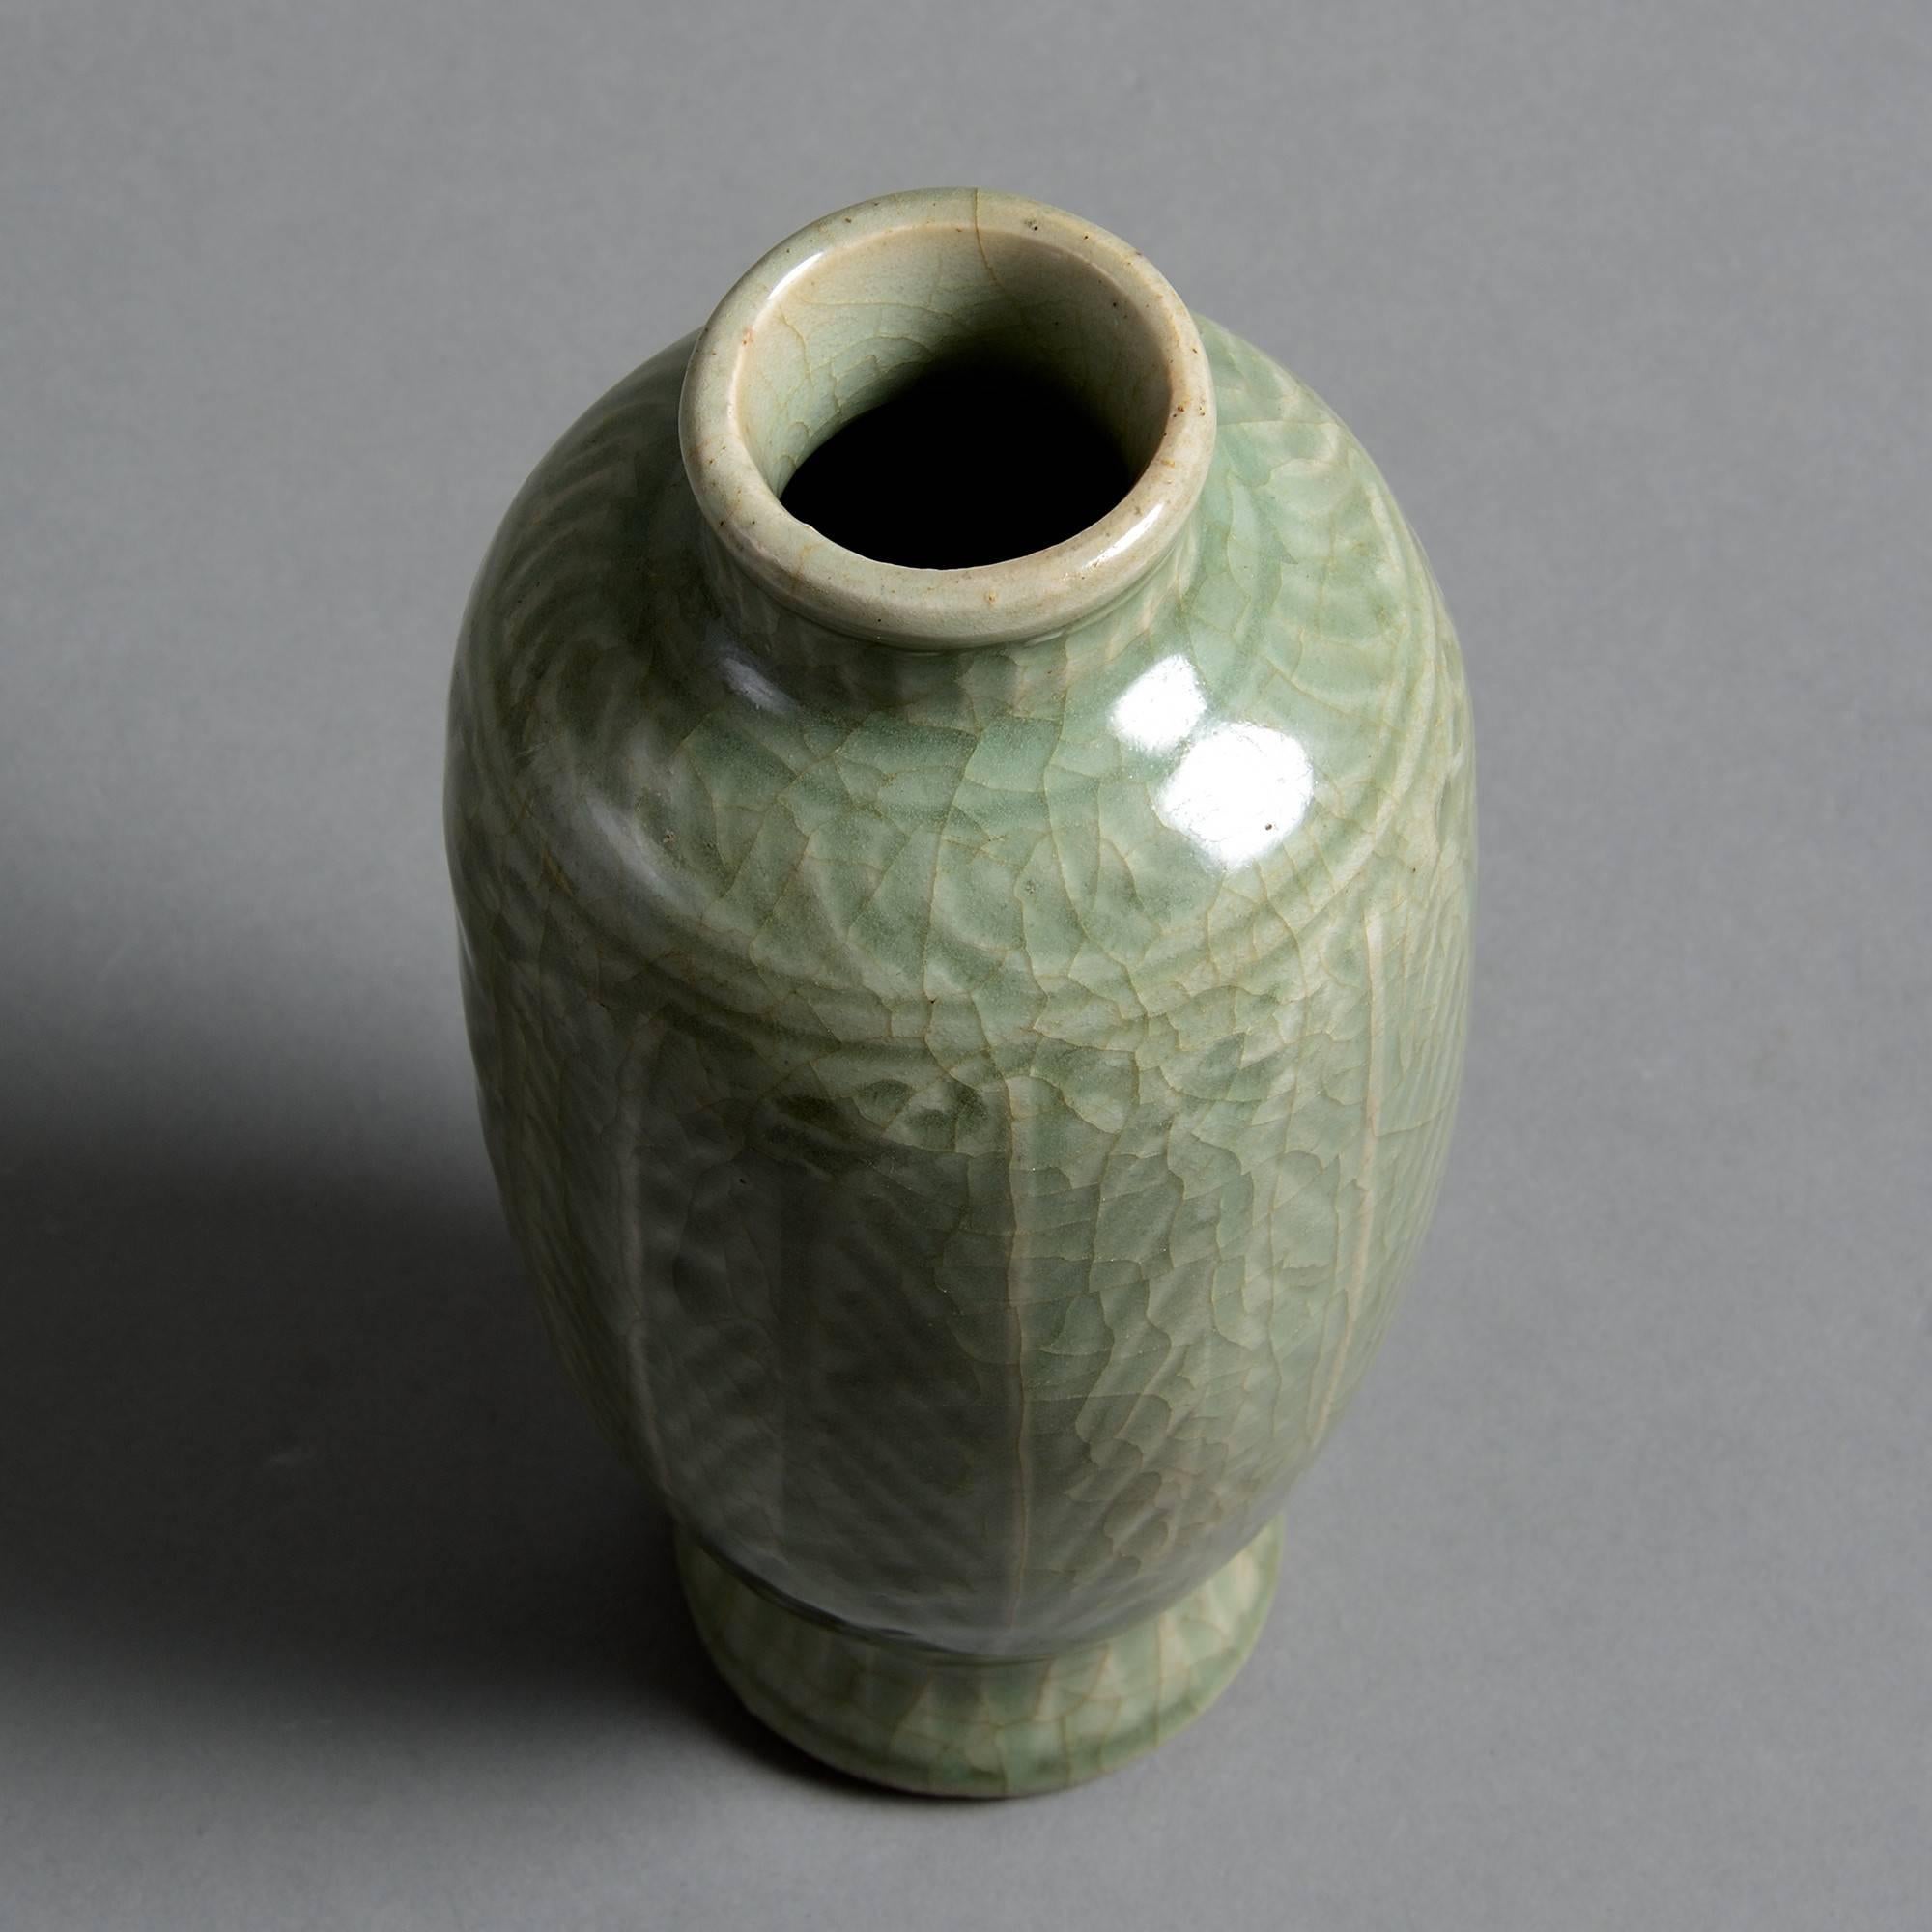 A late 16th century celadon porcelain vase, the body with palm decoration under a crackle glaze. 

Ming dynasty (1368-1644).